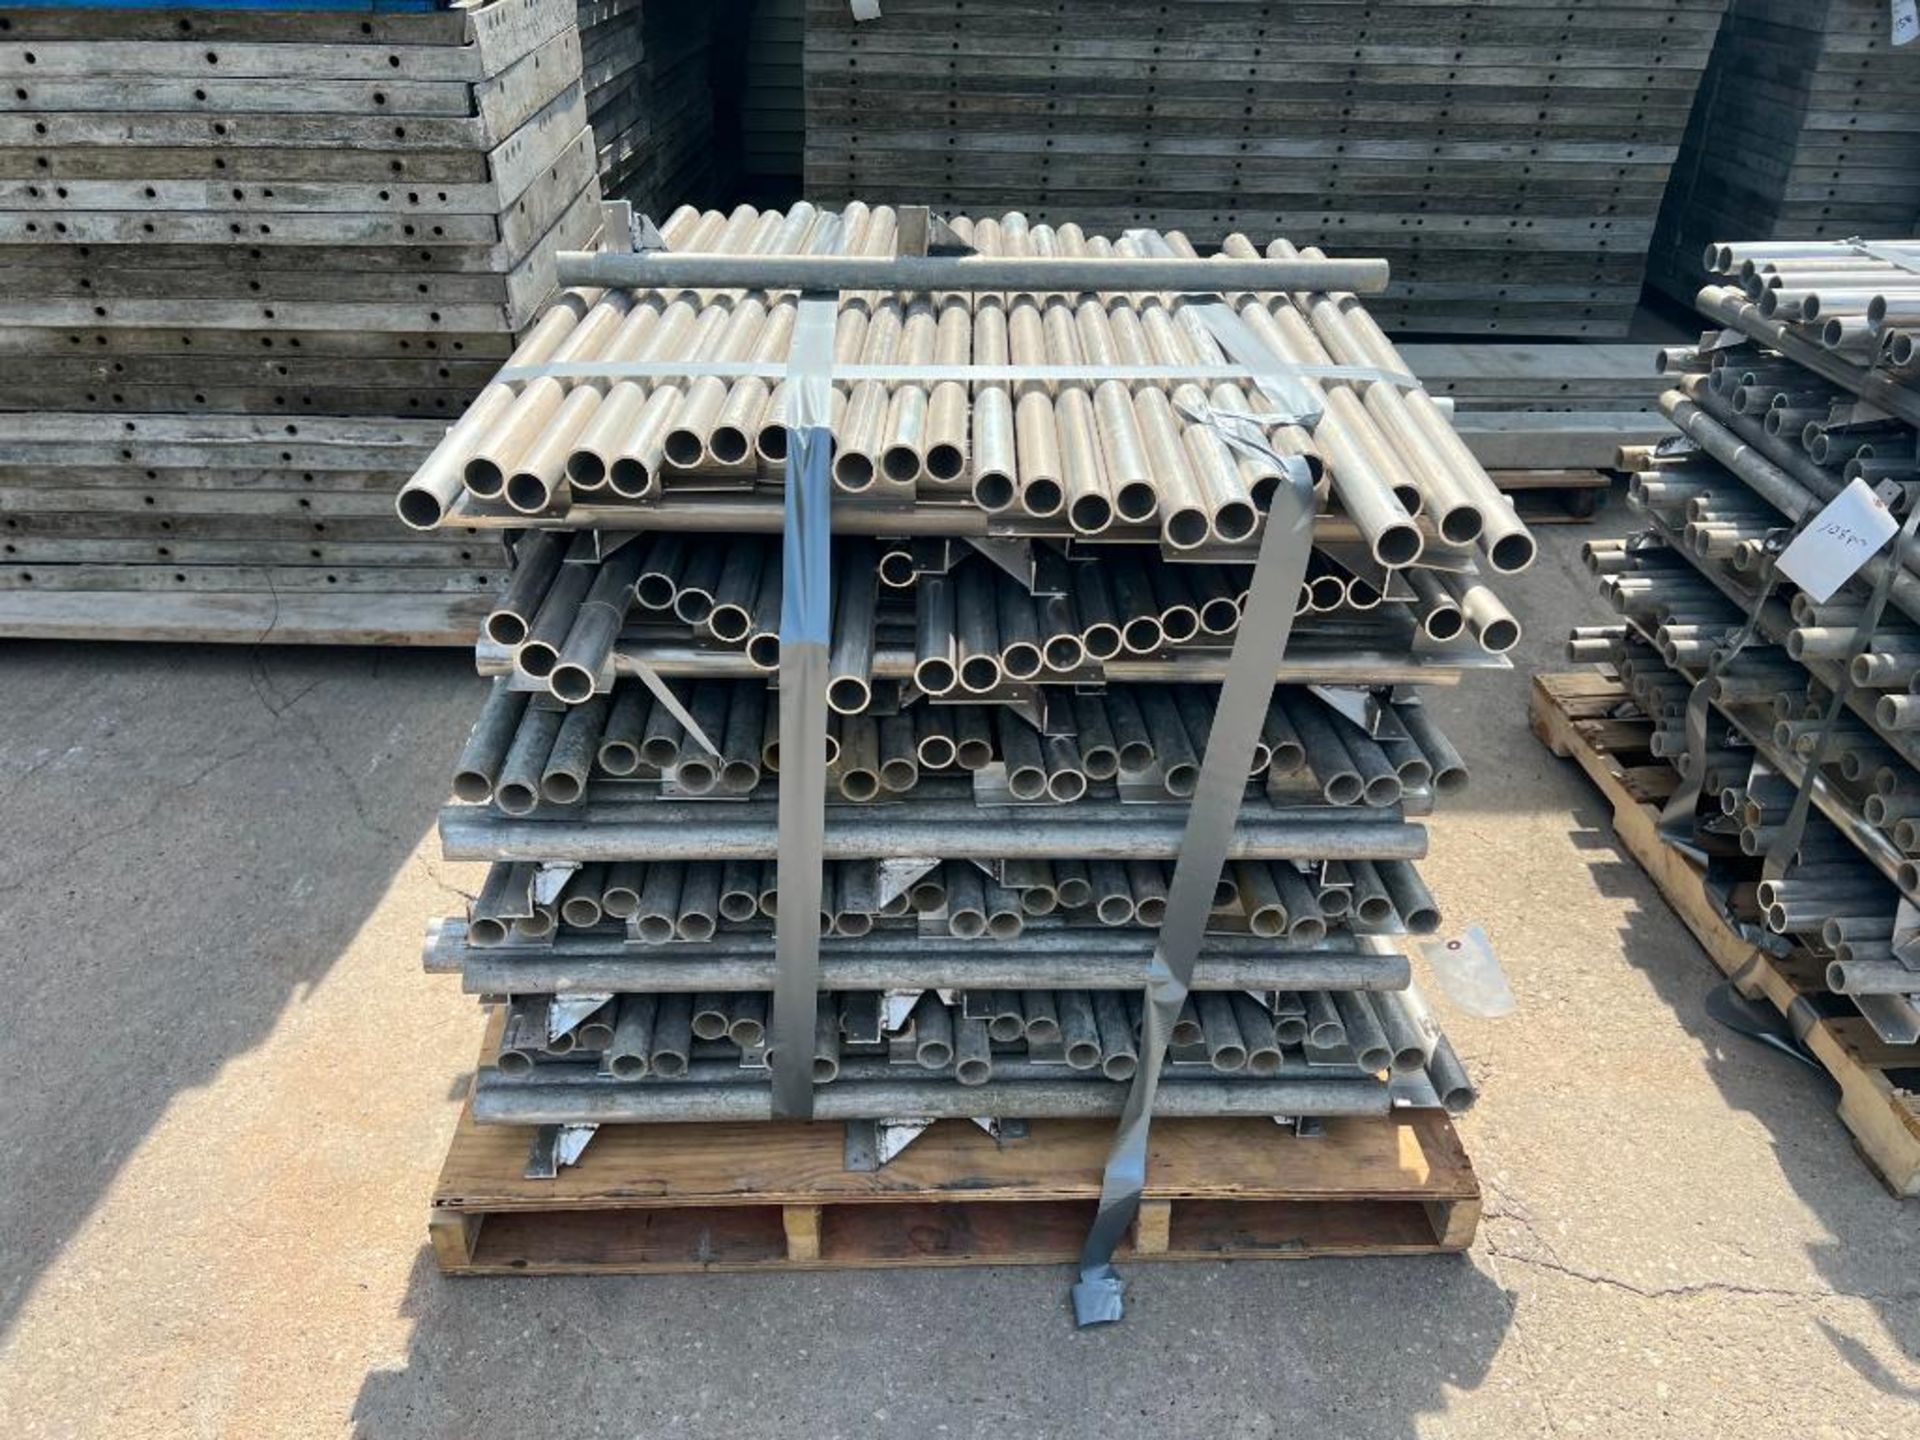 (200) New Scaffolding Safety Rails. Located in Mt. Pleasant, IA